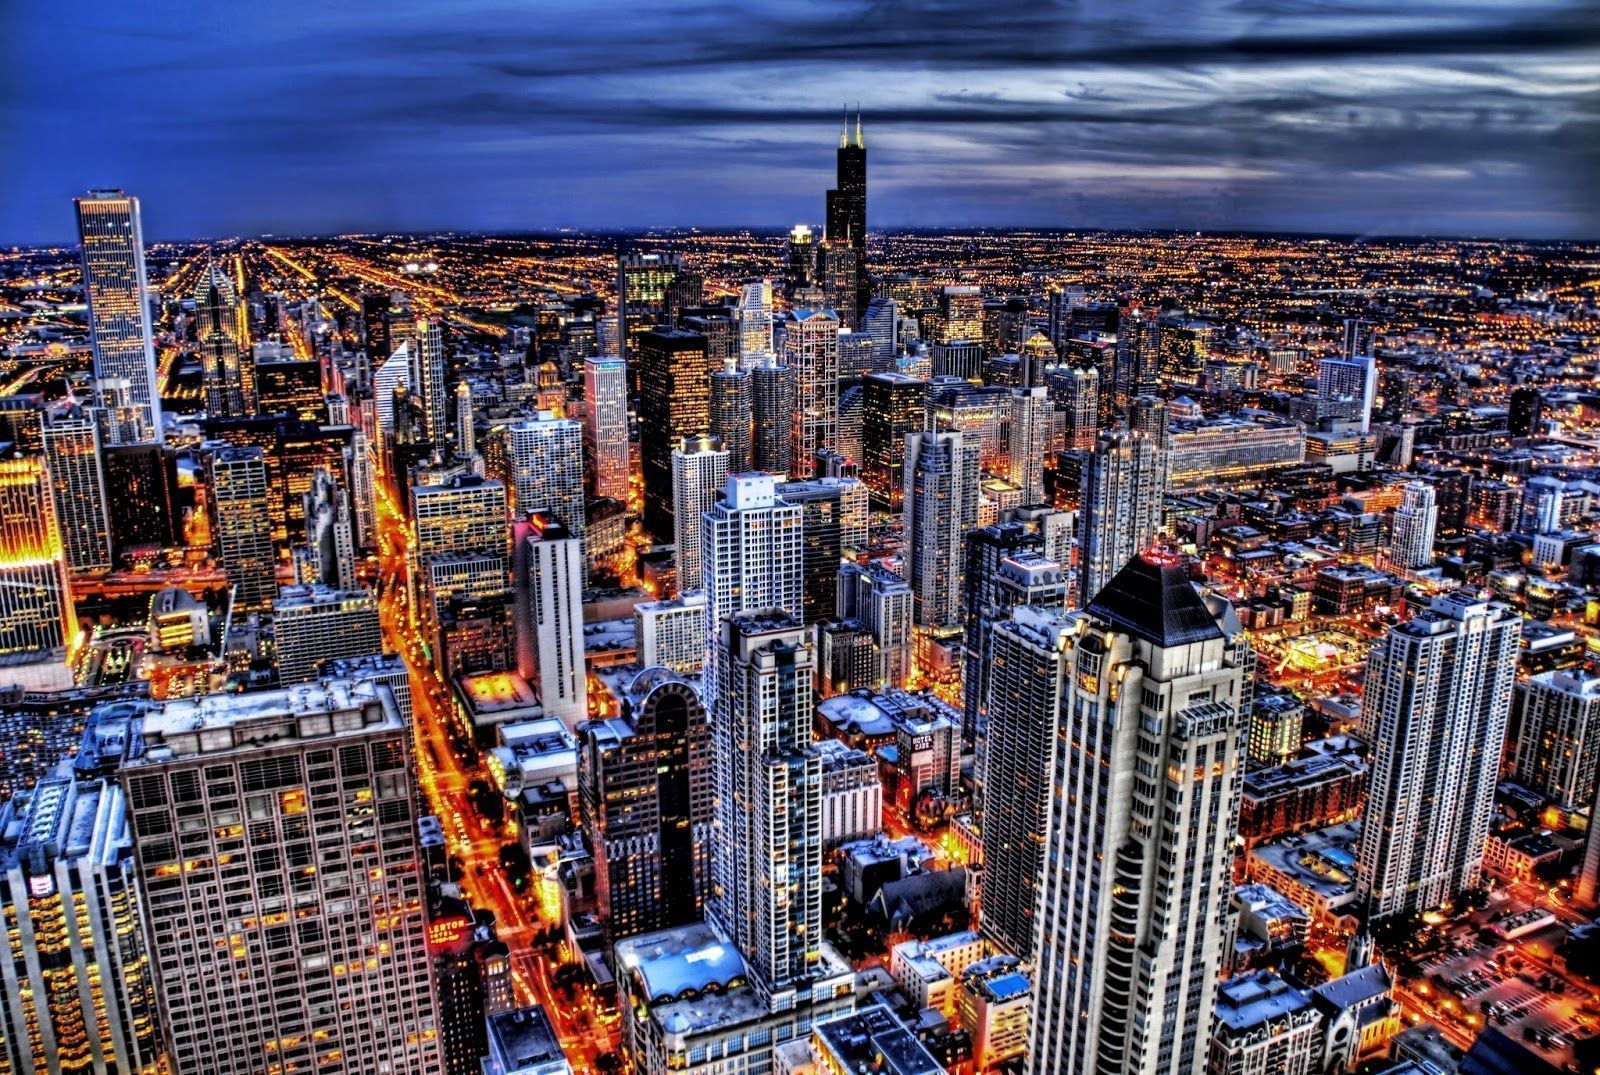 The Chicago skyline at night. - HD